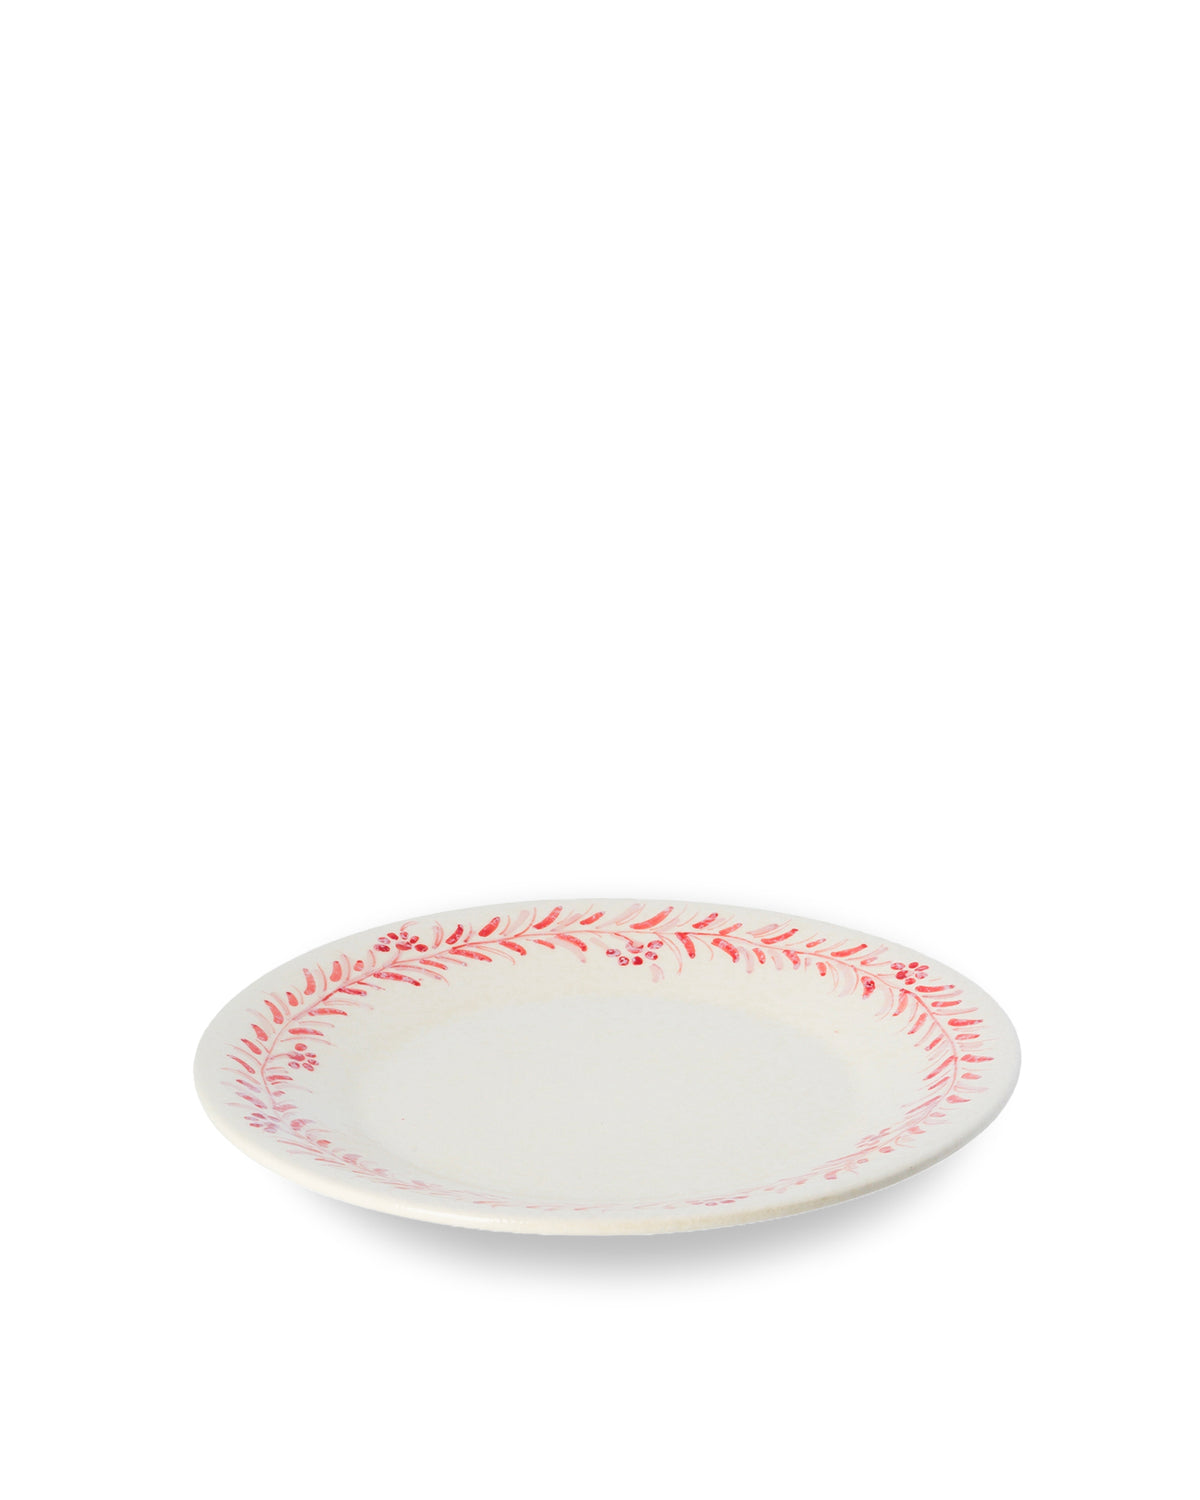 Floral Christian Plate